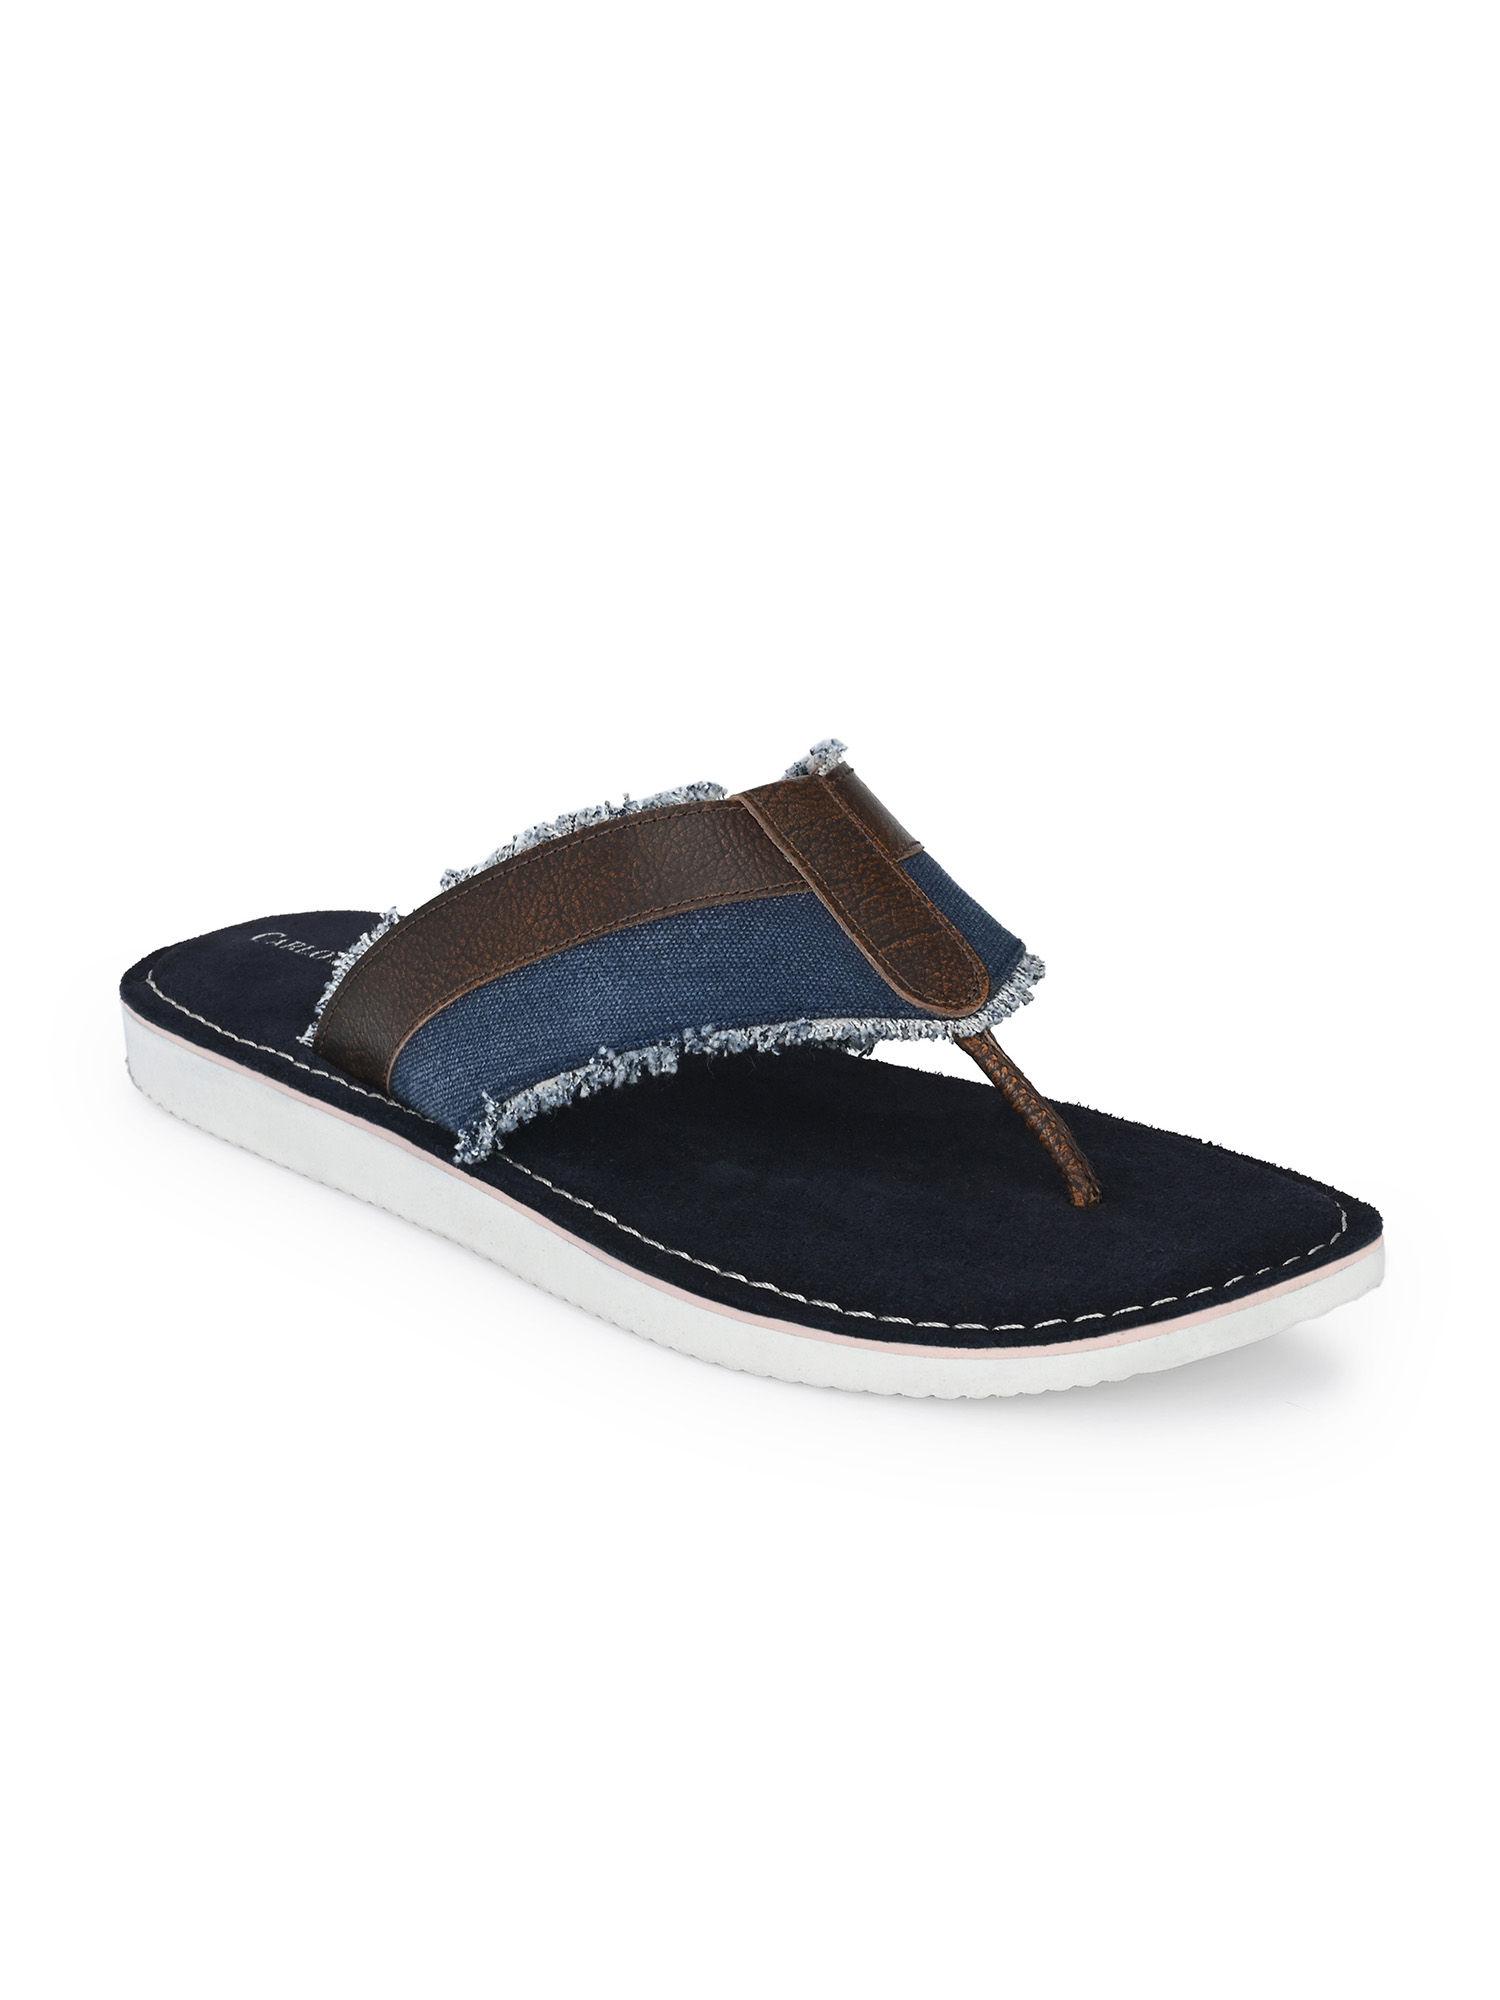 brush off leather brown blue flipflops